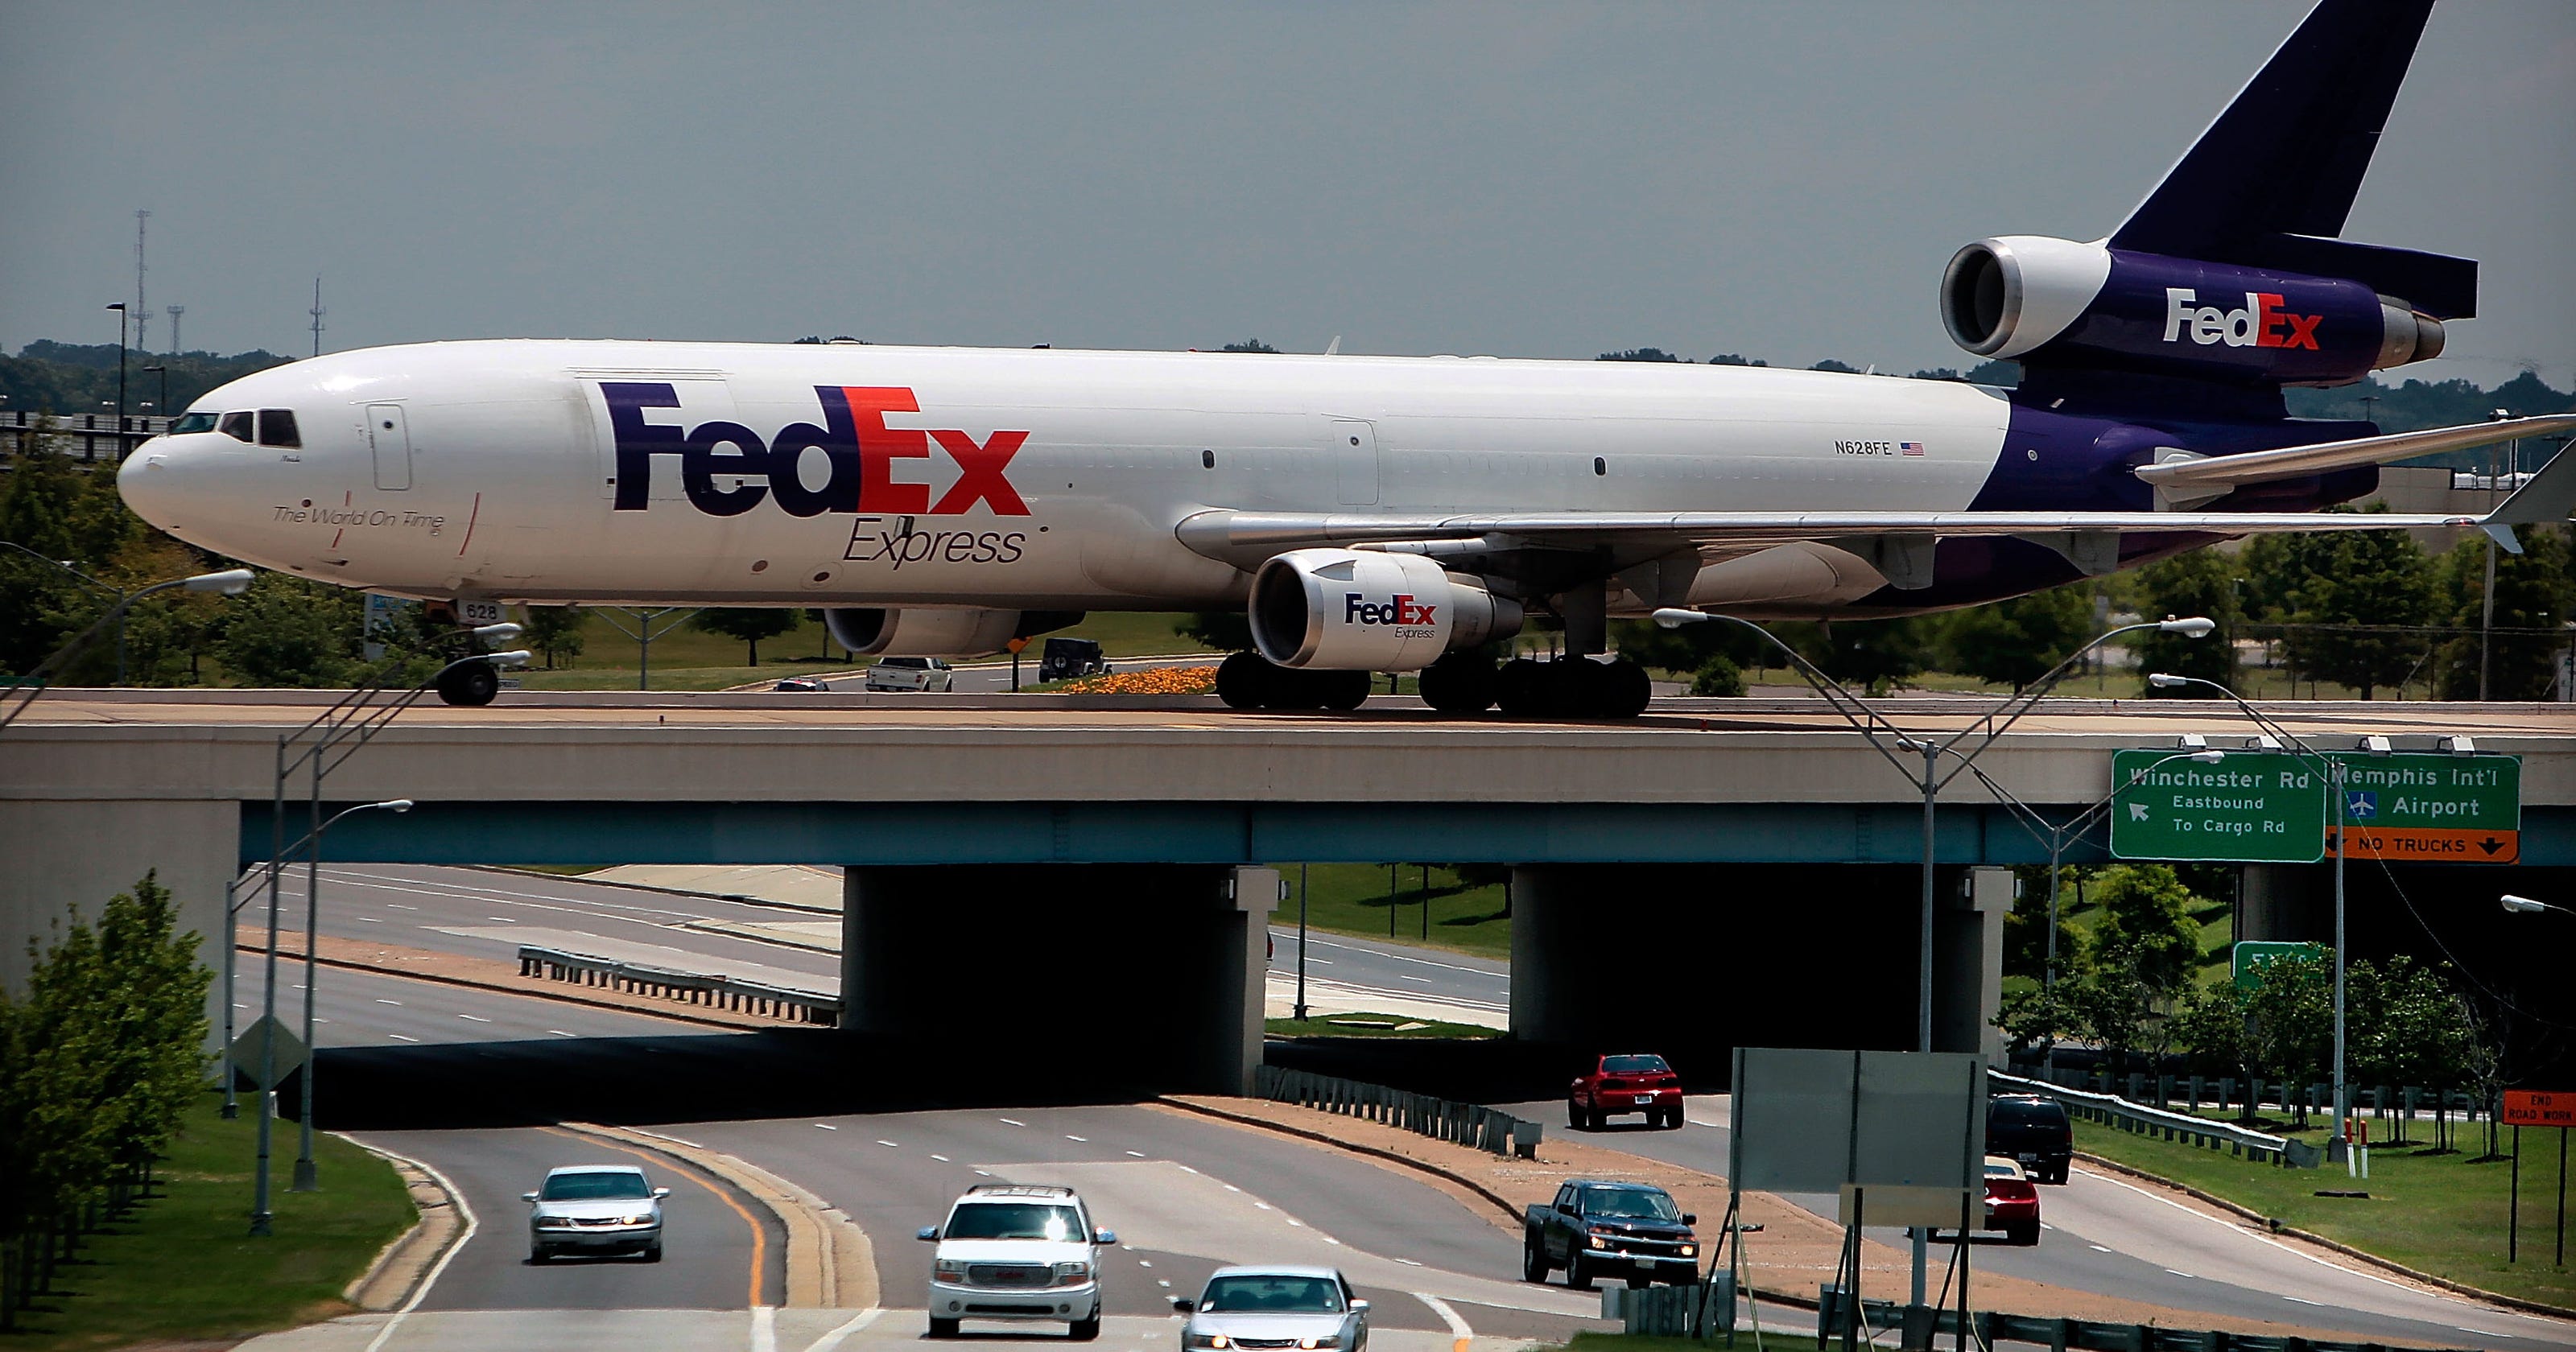 FedEx targeted in cyber attack as hackers hit companies across globe